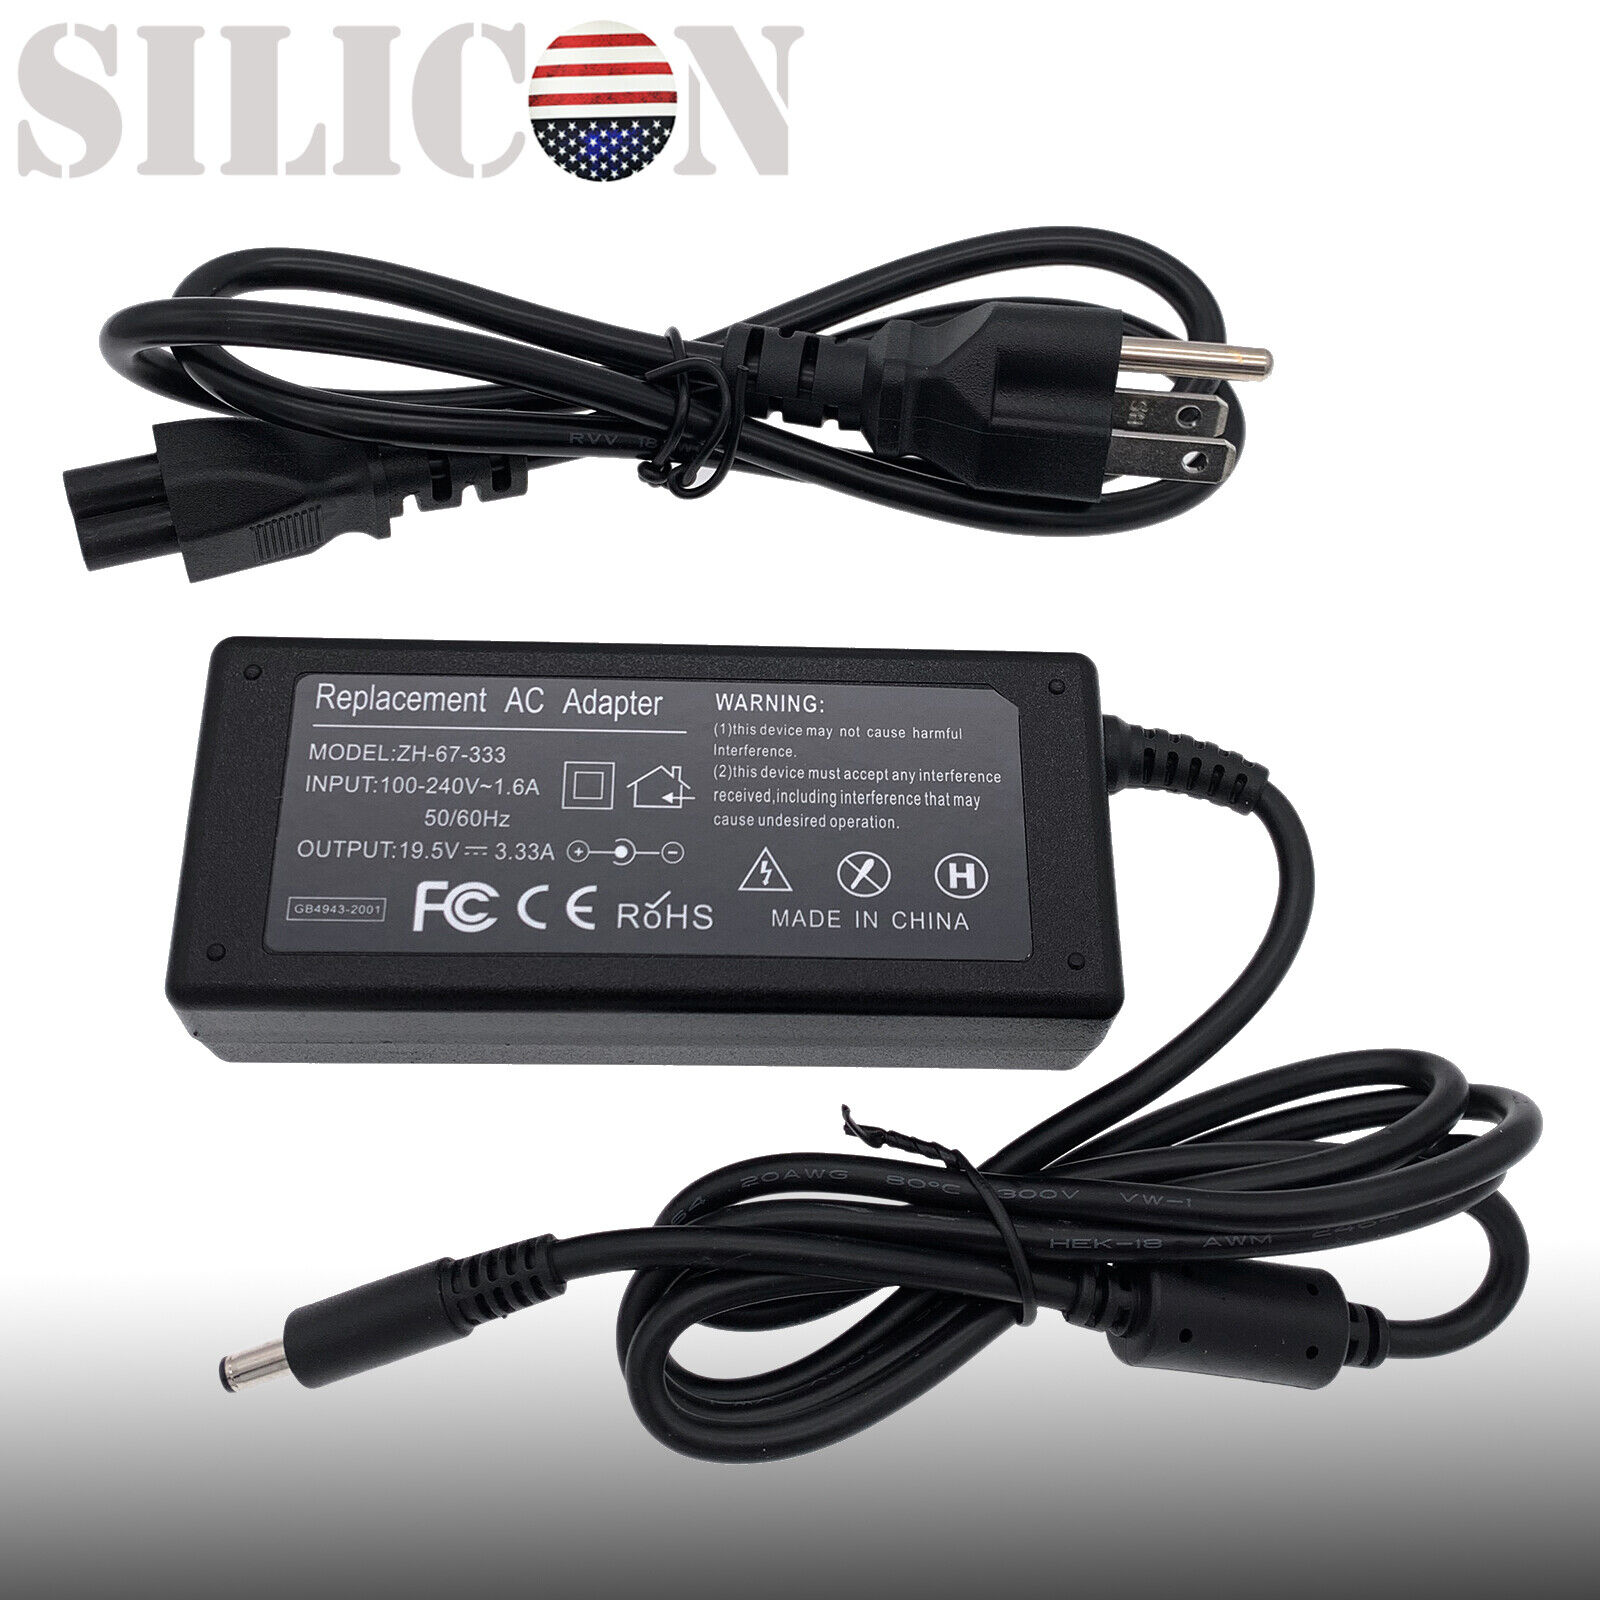 For HP Envy 15-1272wm 15-1222wm 15-1033wm 65W AC Charger Adapter Power Supply